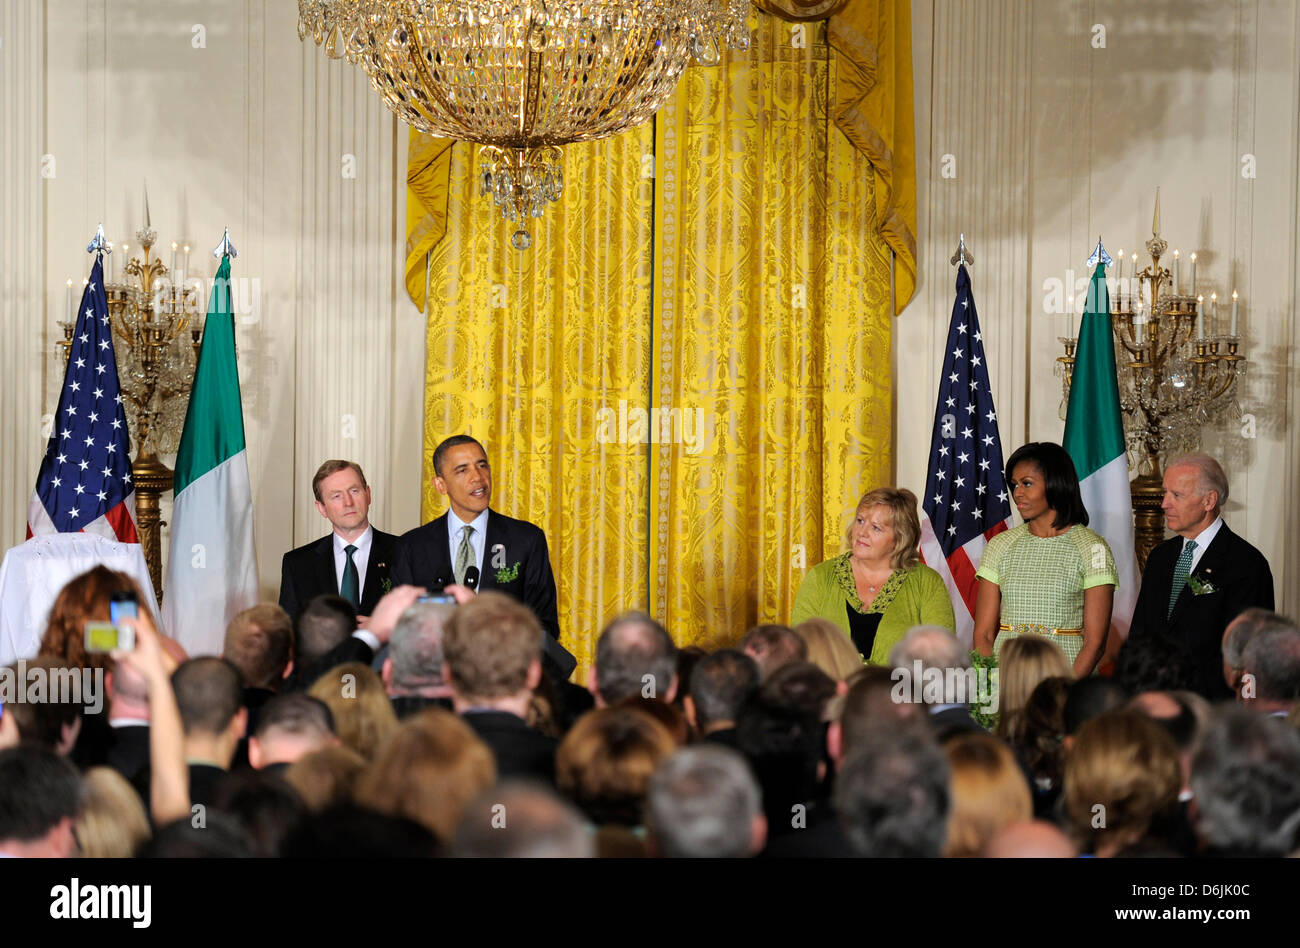 United States President Barack Obama (2nd,L) makes remarks as Irish Prime Minister Enda Kenny (L) listens along with first lady Michelle Obama (2nd,R), Kenny's wife Fionnuala (3rd,R) and Vice President Joe Biden (R) during a reception in the East Room of the White House, March 20, 2012, in Washington, DC. The two leaders concluded a working day devoted to discussions on economic ma Stock Photo